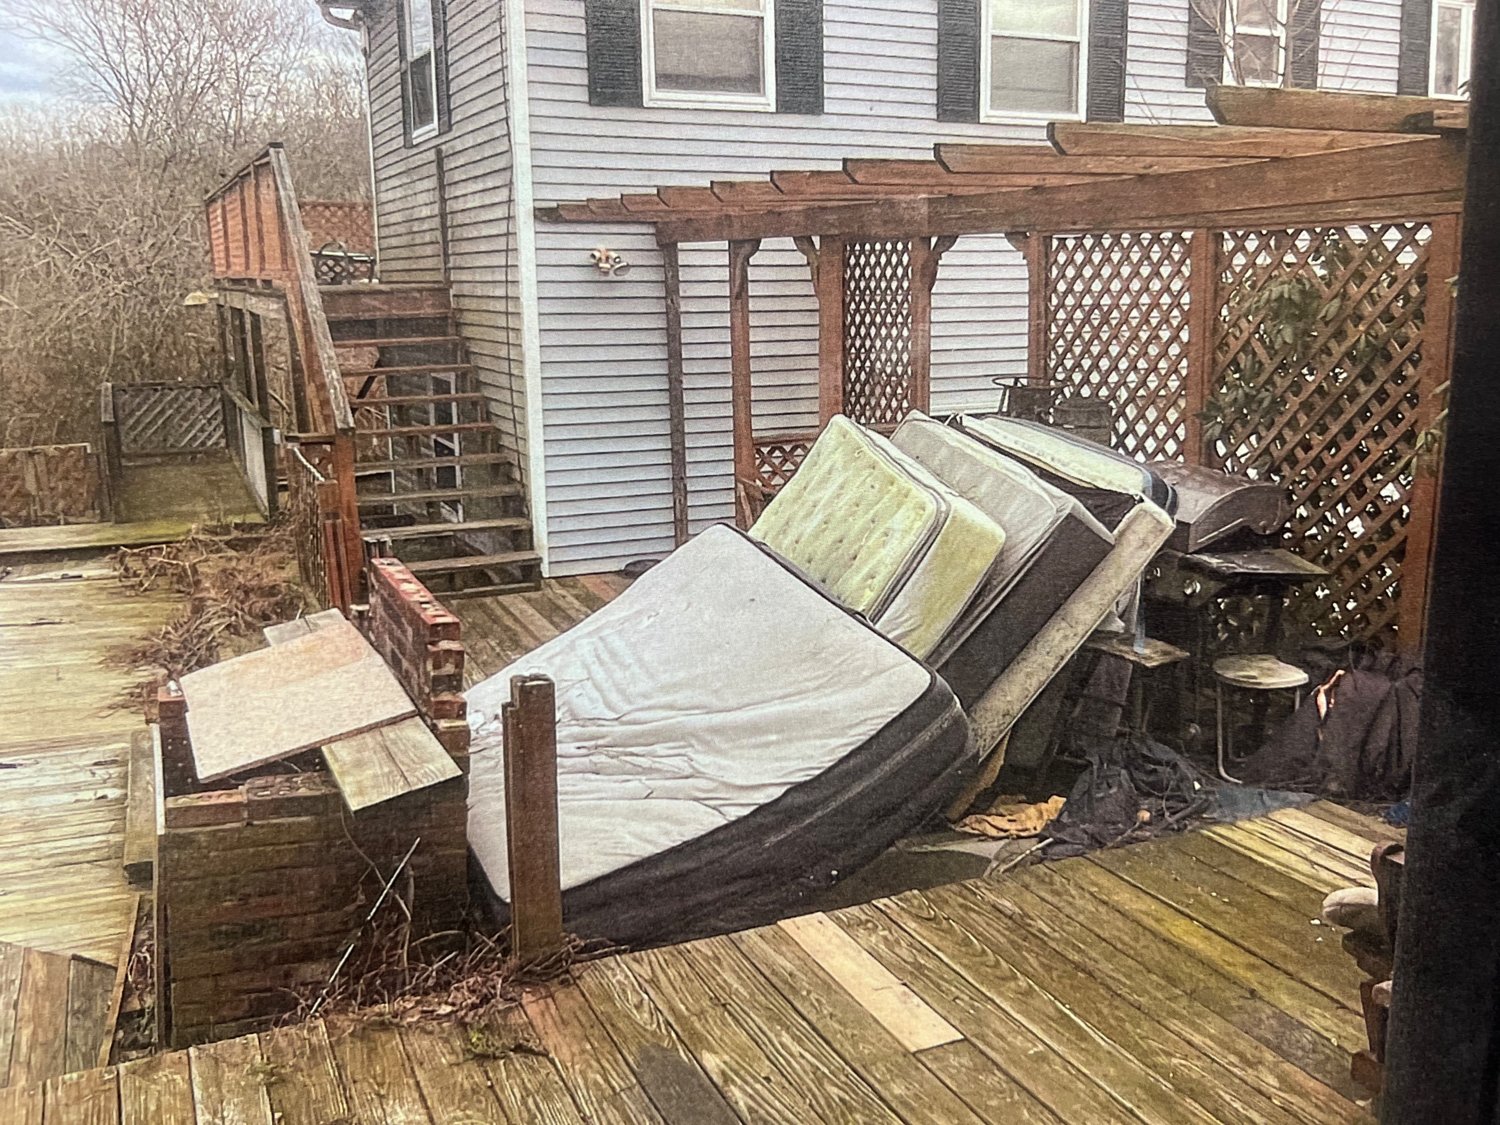 The house had been on the Town’s radar for over a year following reports of large amounts of debris throughout the property’s exterior. Here, multiple mattresses are seen stacked in an area outside.